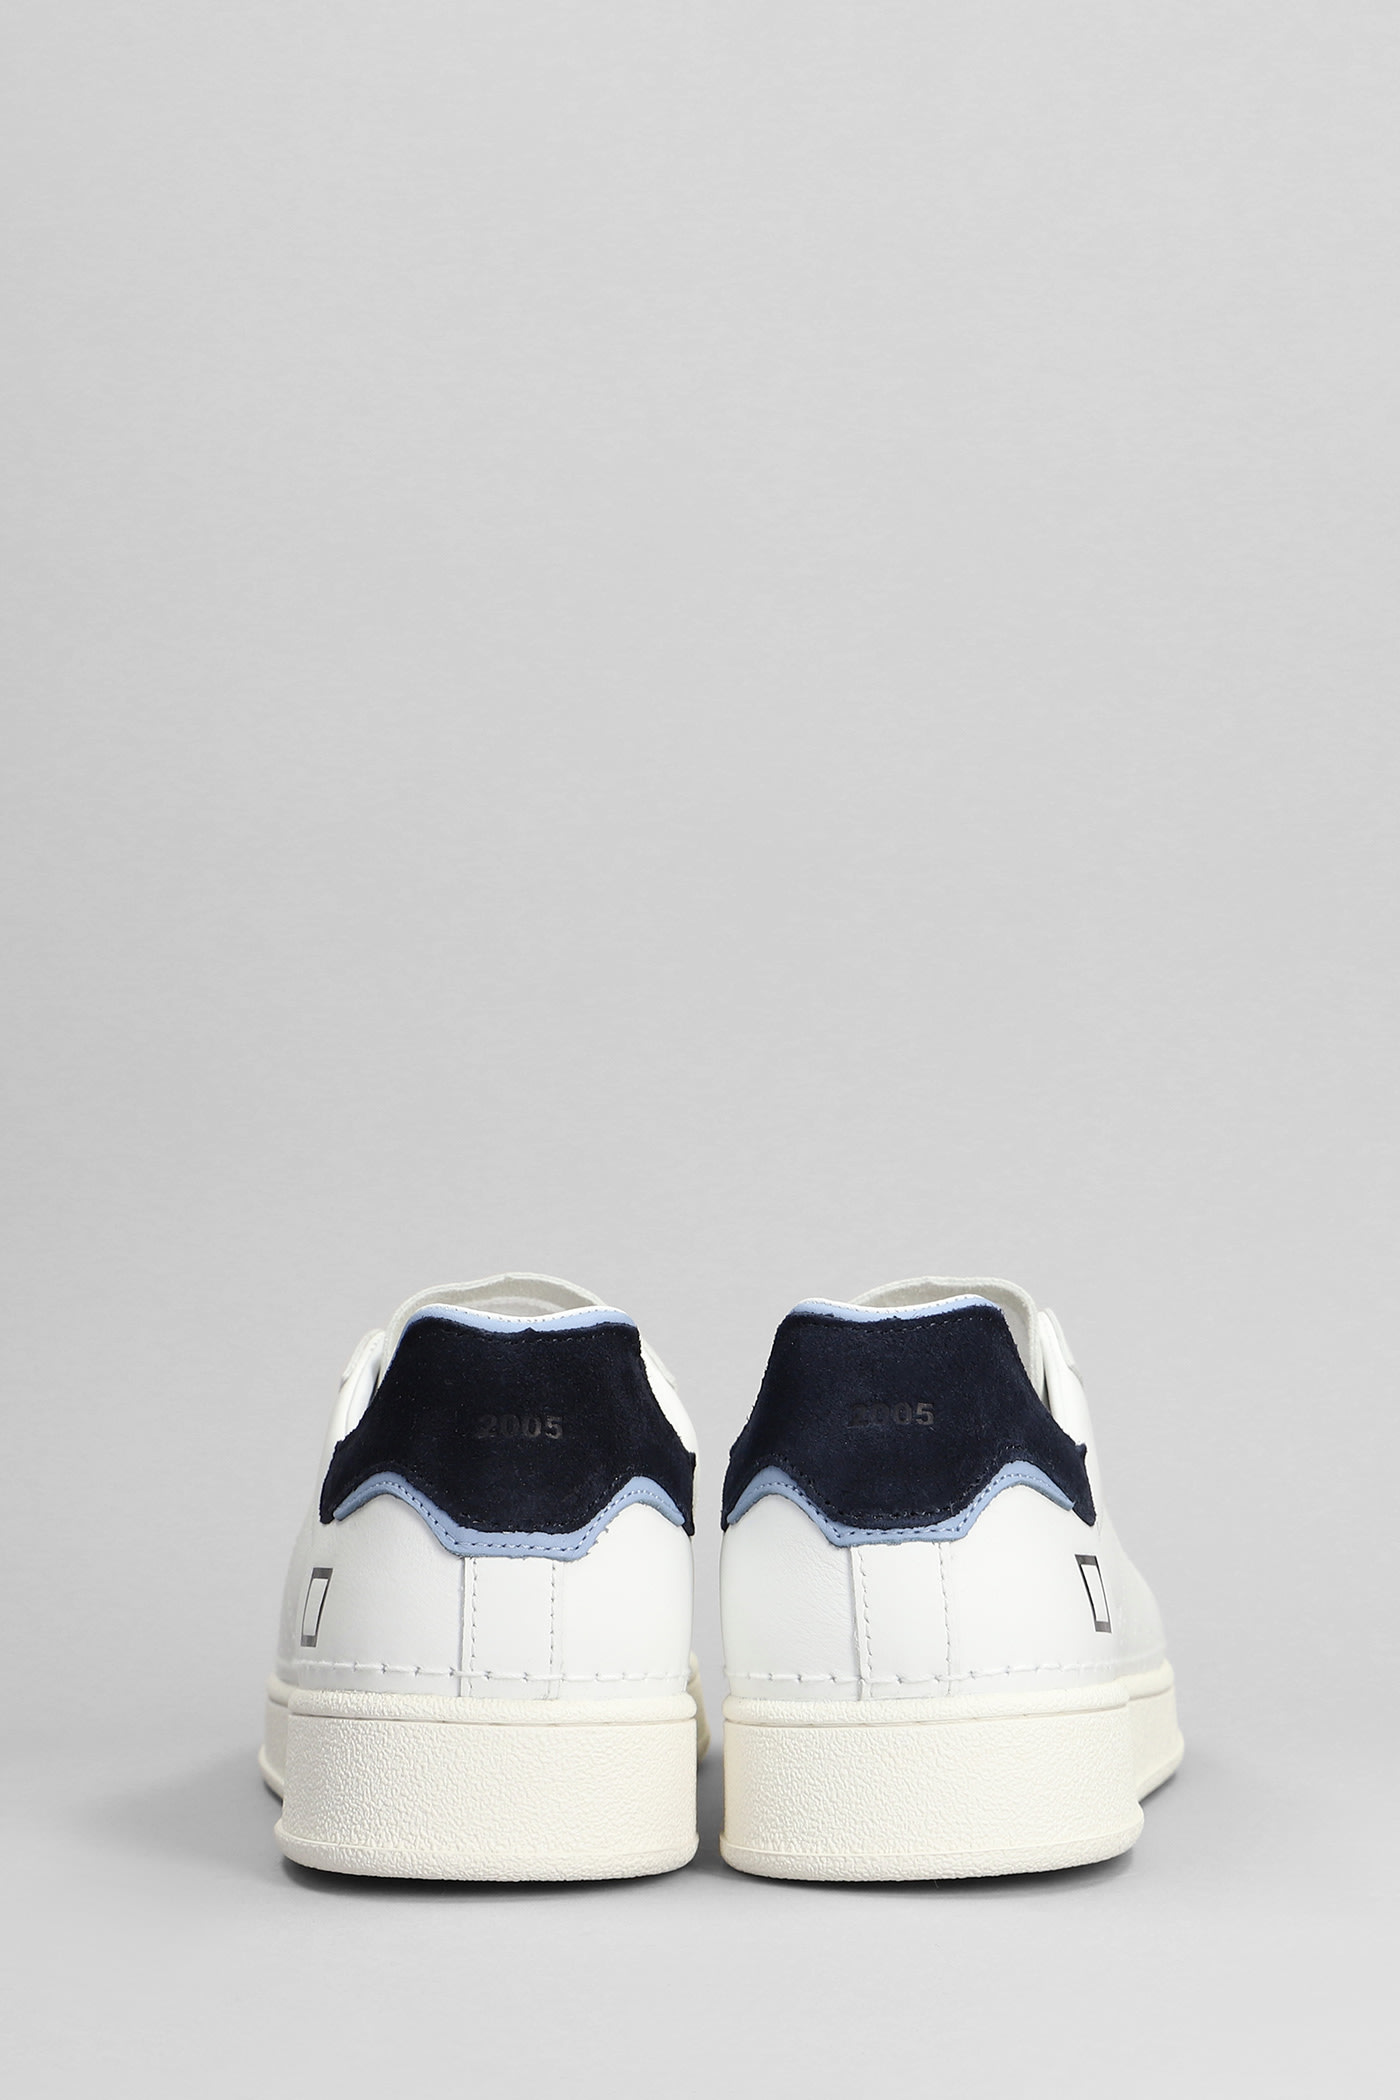 Shop Date Base Sneakers In White Leather